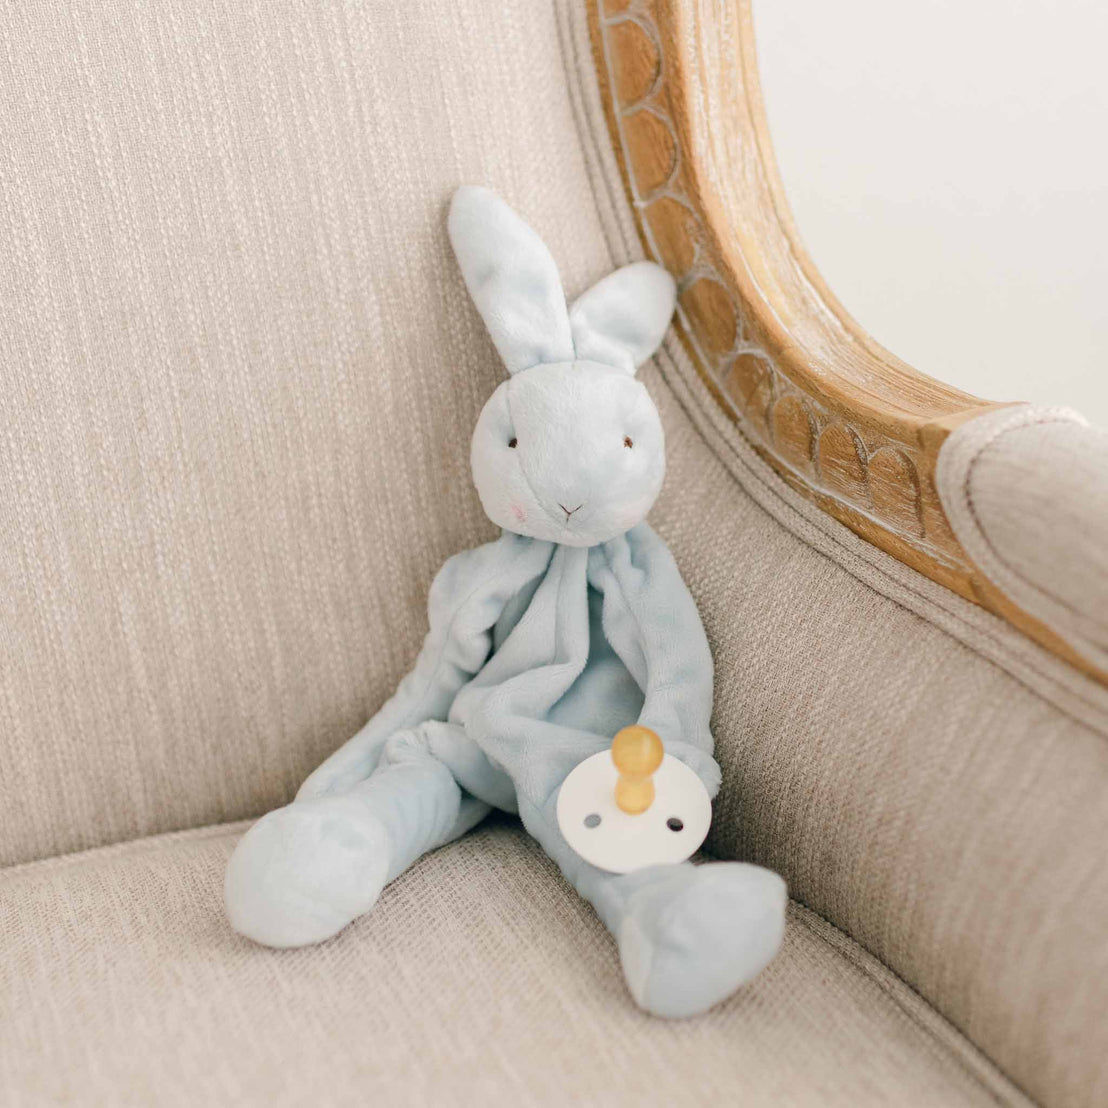 Photo of a blue bunny stuffed animal sitting on a chair. The bunny is able to function as a pacifier holder